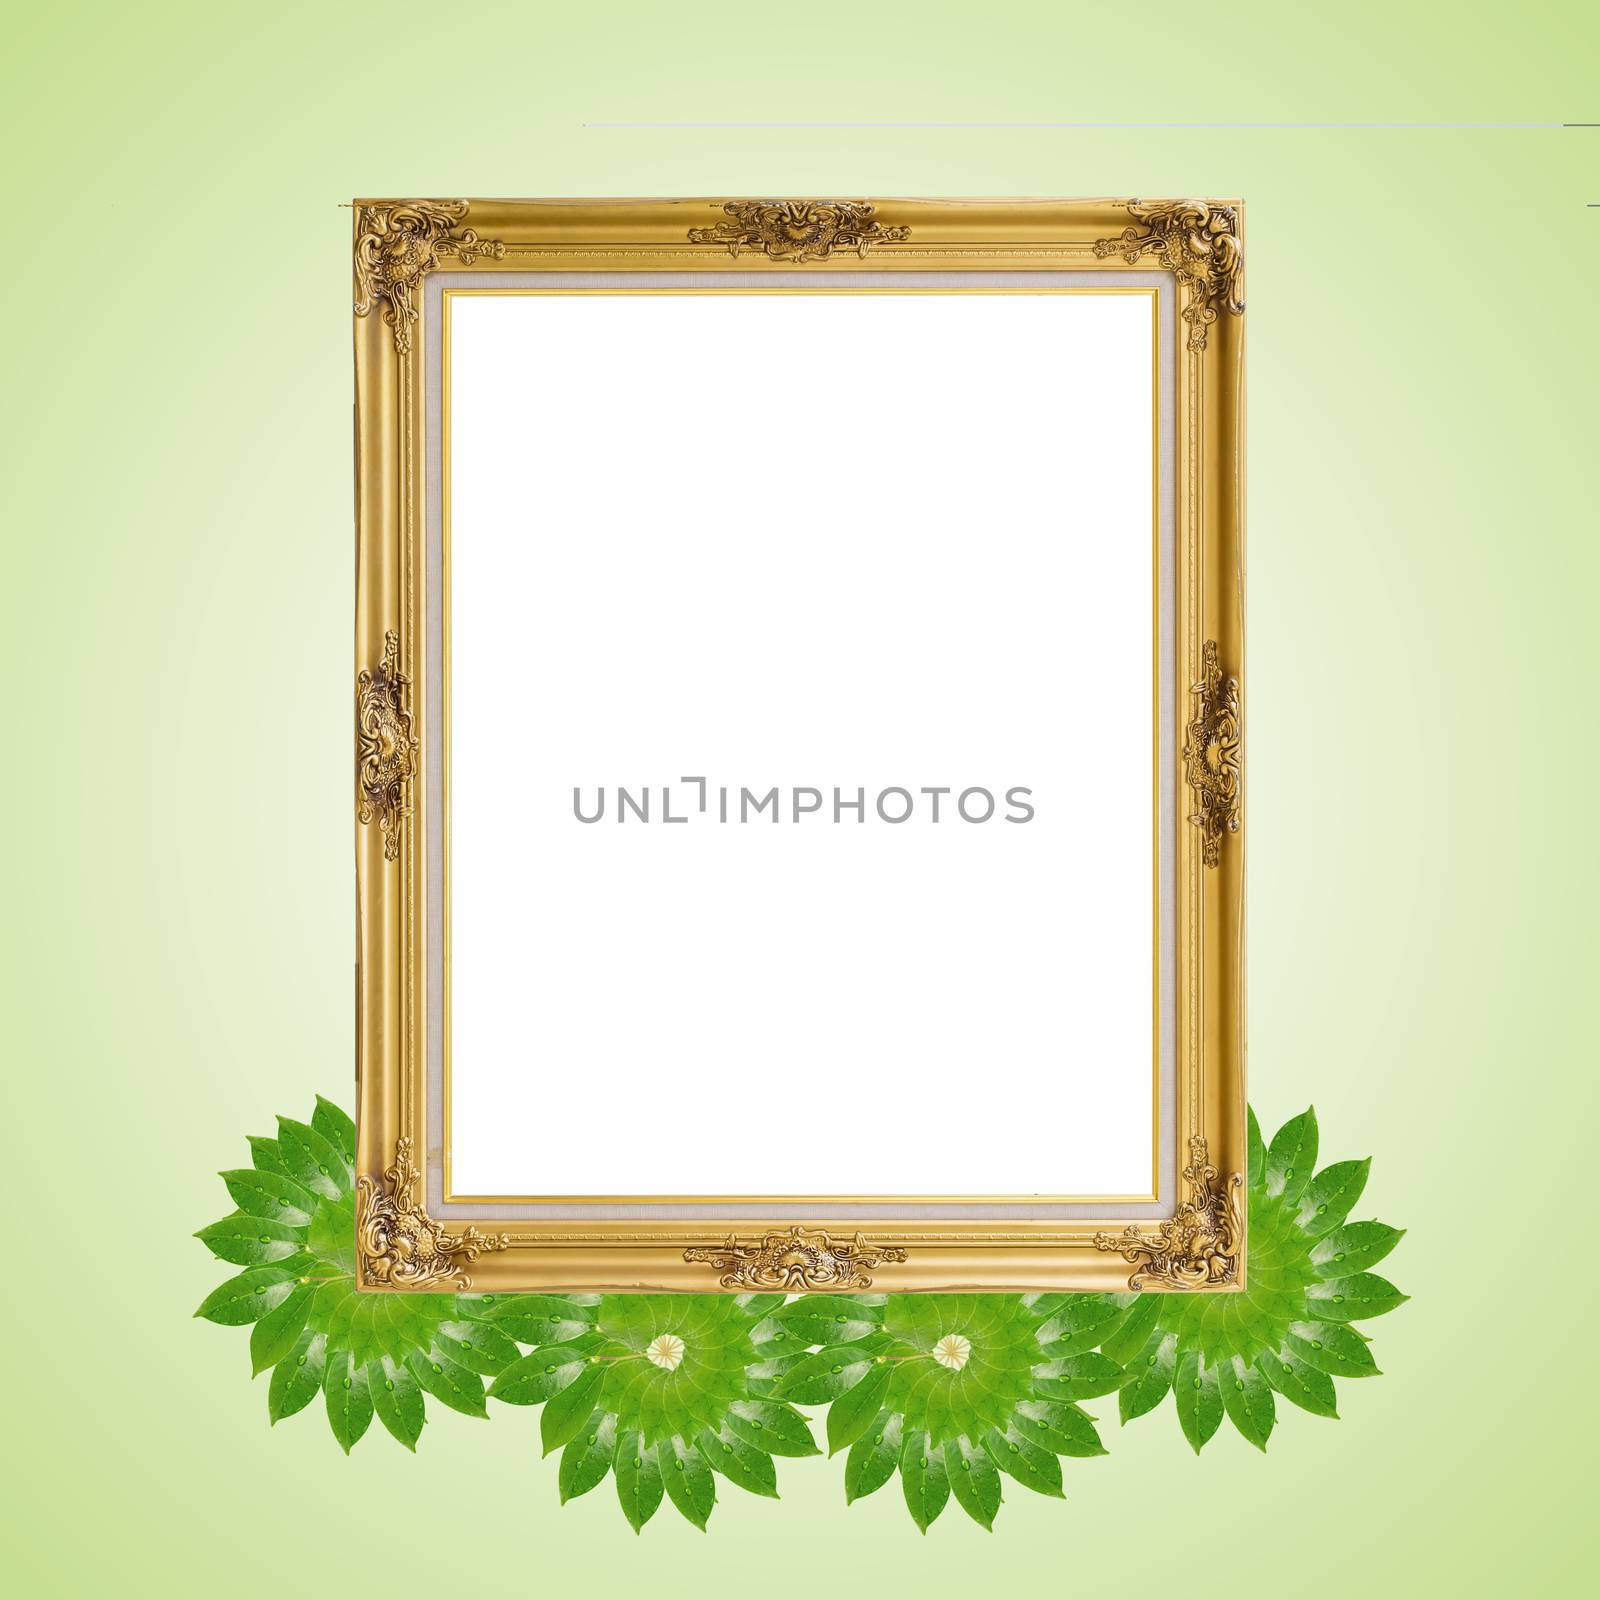 Gold louise and leaves photo frame isolated white background